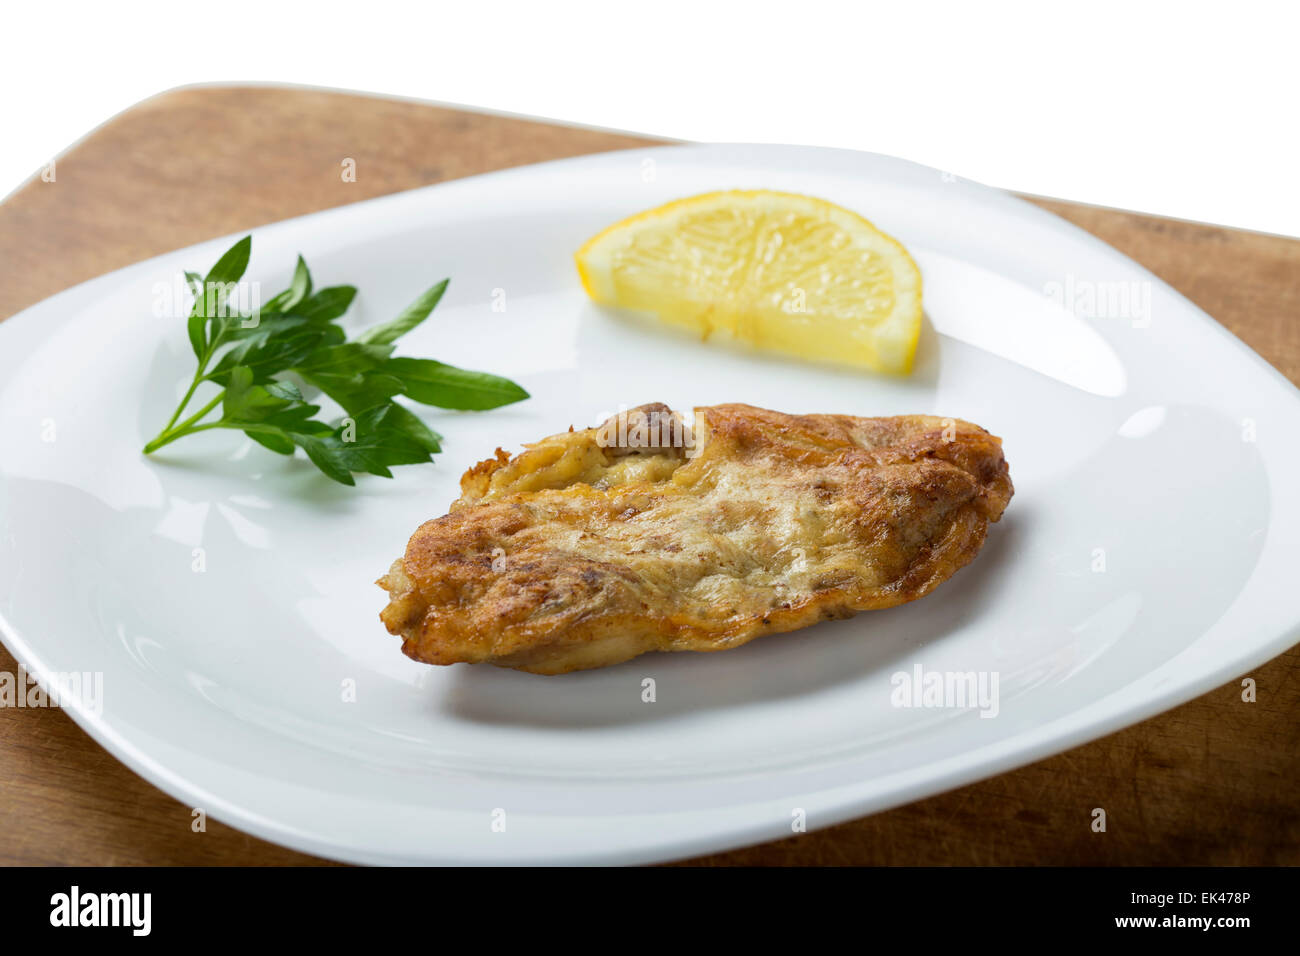 Fried pork brains with lemon and parsley on the plate Stock Photo